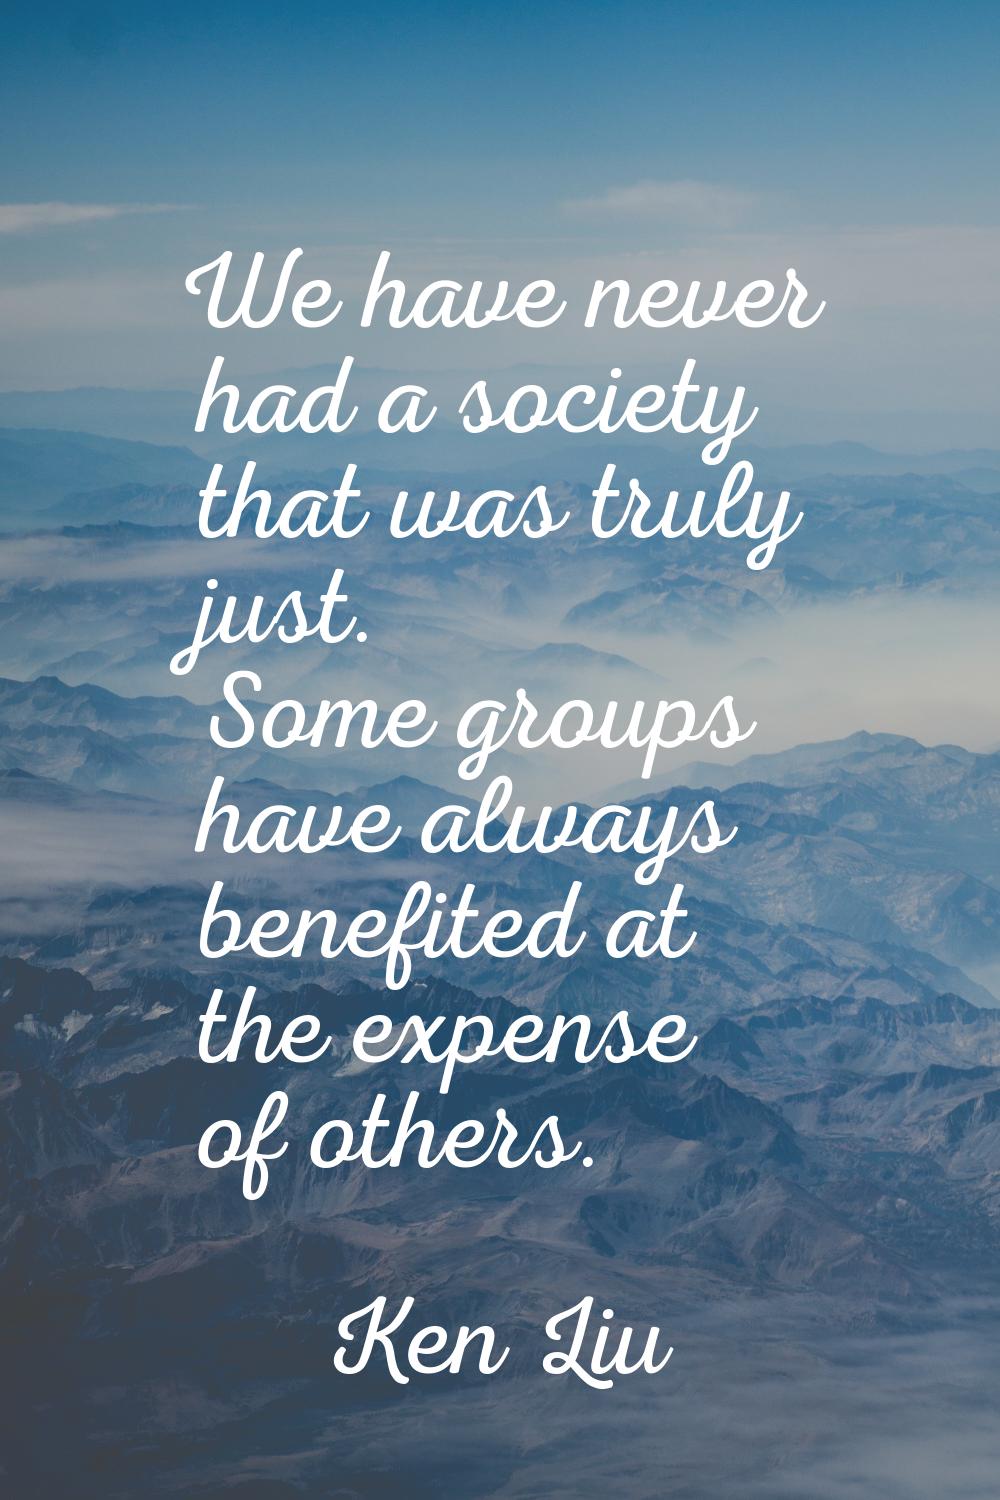 We have never had a society that was truly just. Some groups have always benefited at the expense o